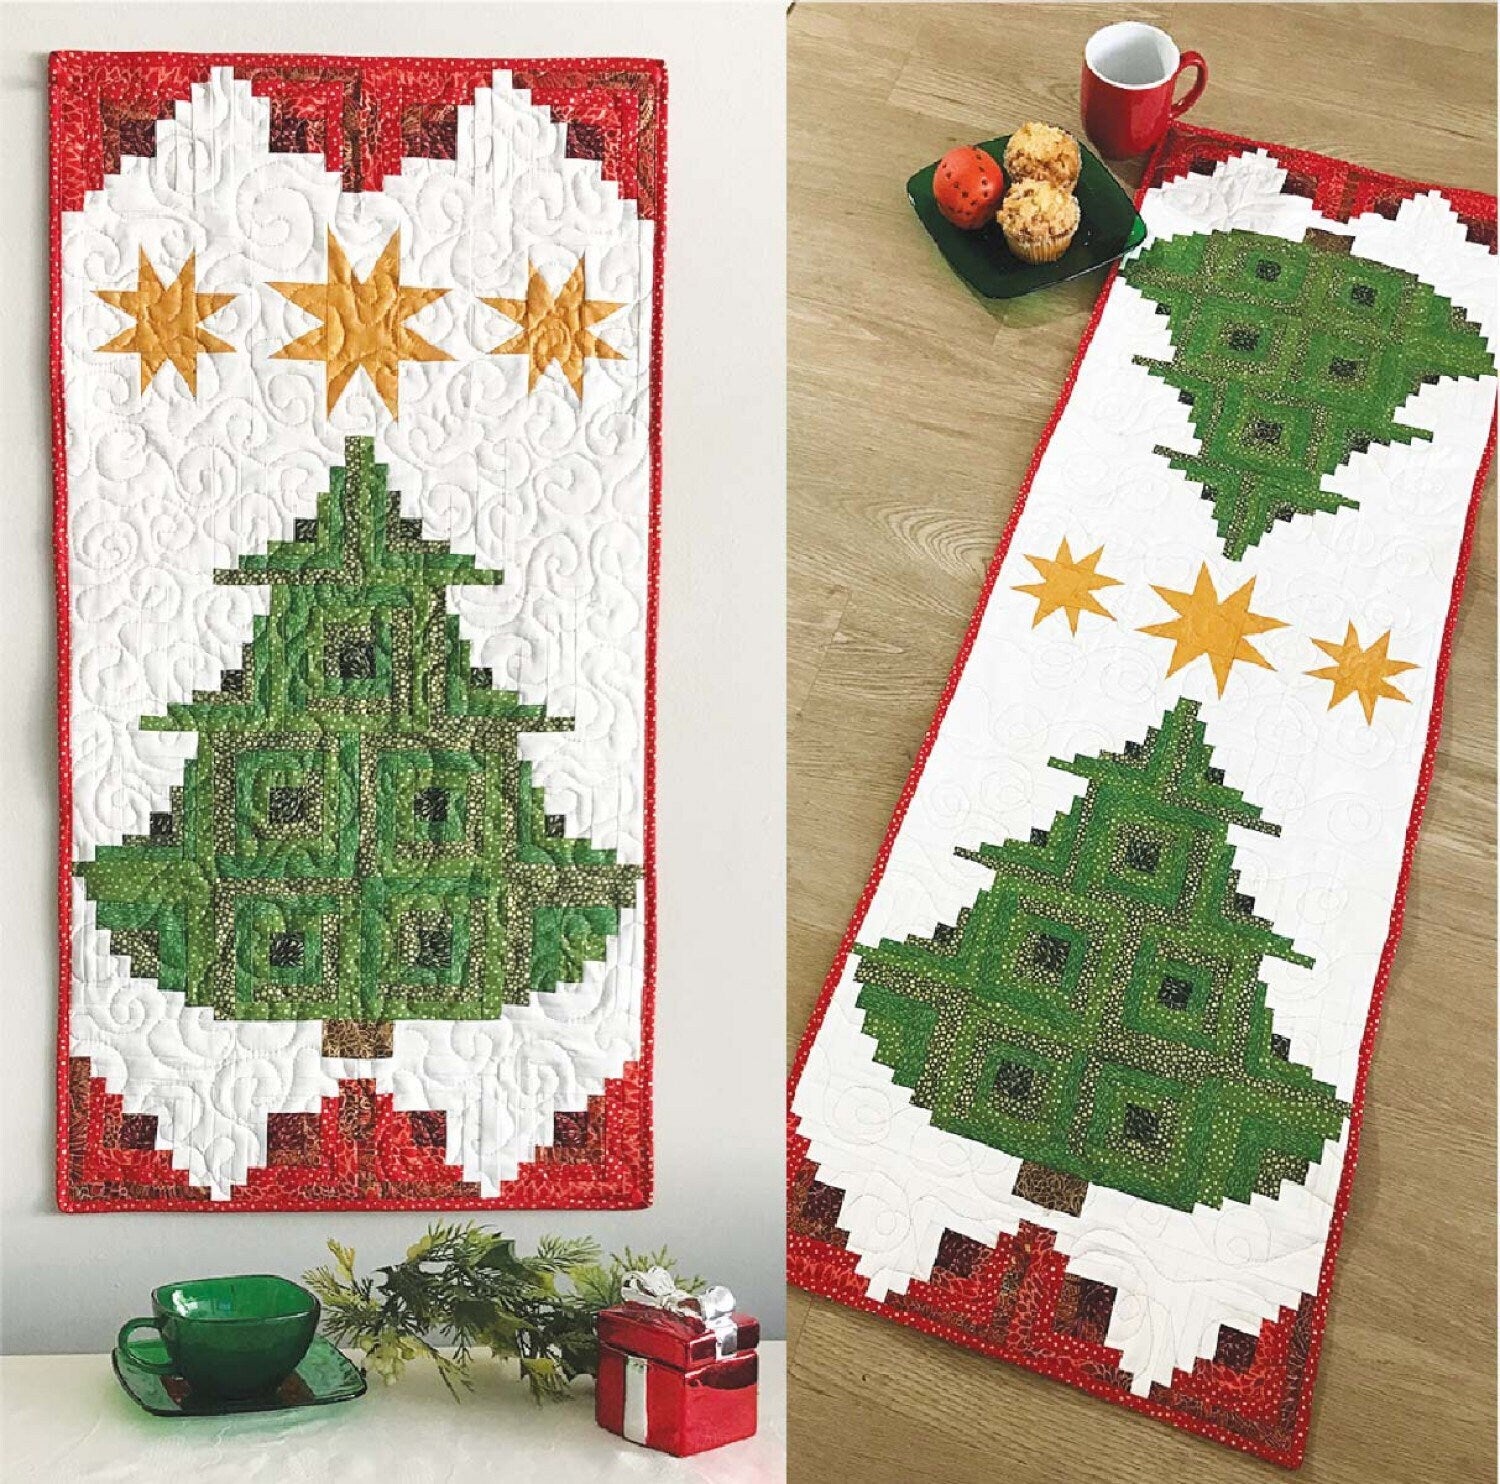 Pine Tree Banner or Table Runner Pattern - Cut Loose Press - Jean Ann Wright - Christmas Pattern